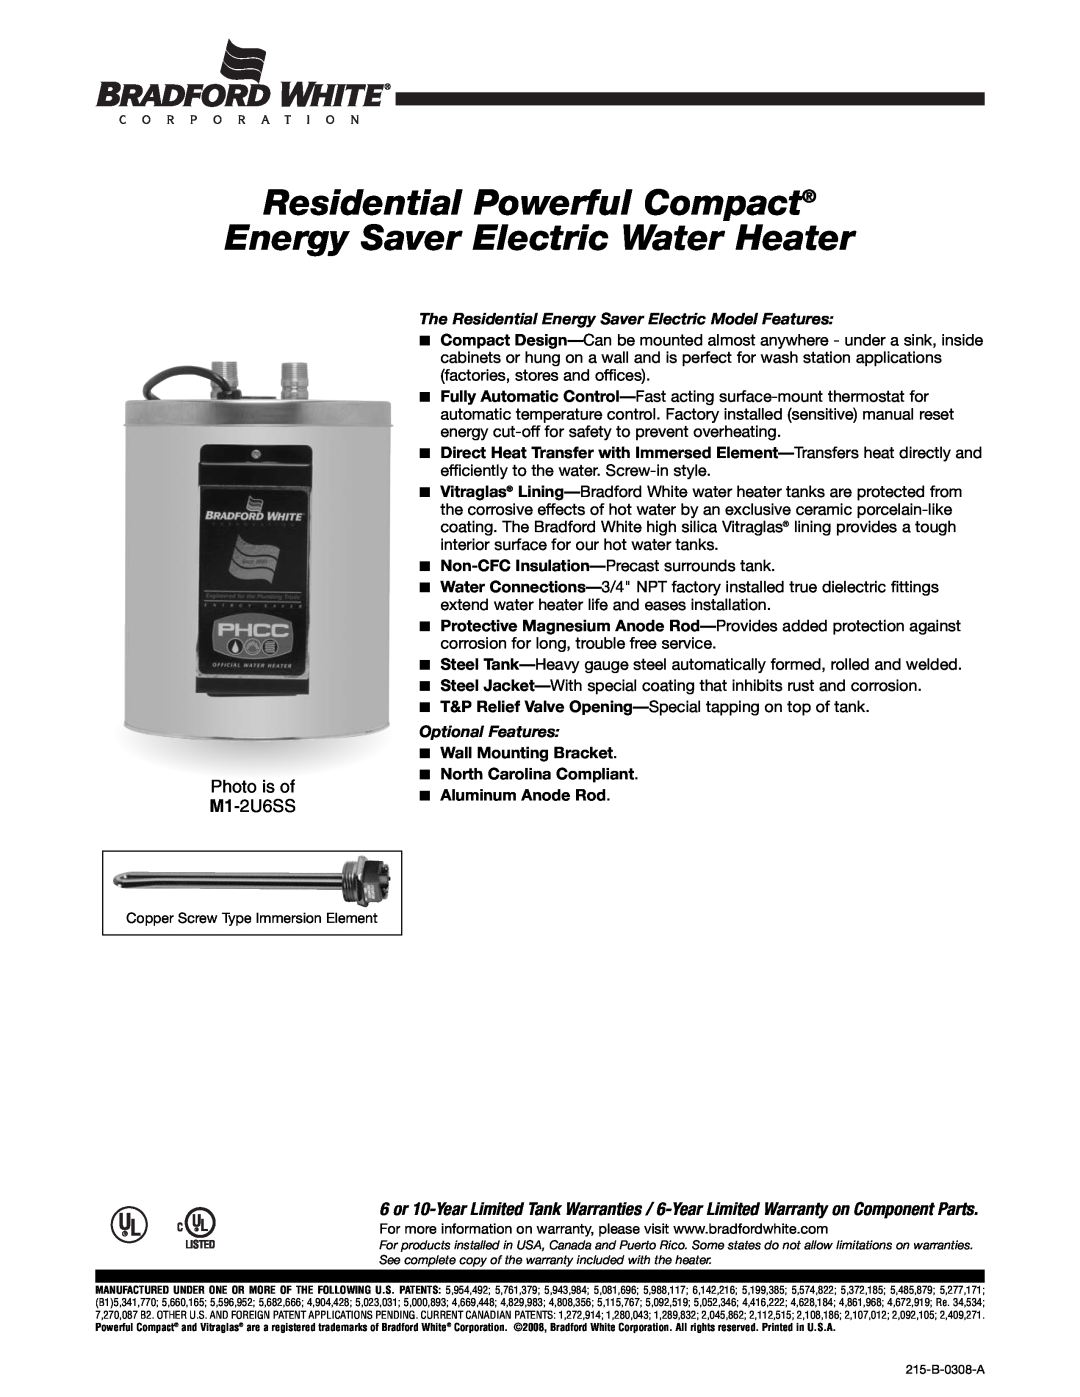 Bradford-White Corp M1-2U6SS warranty Residential Powerful Compact Energy Saver Electric Water Heater, Optional Features 